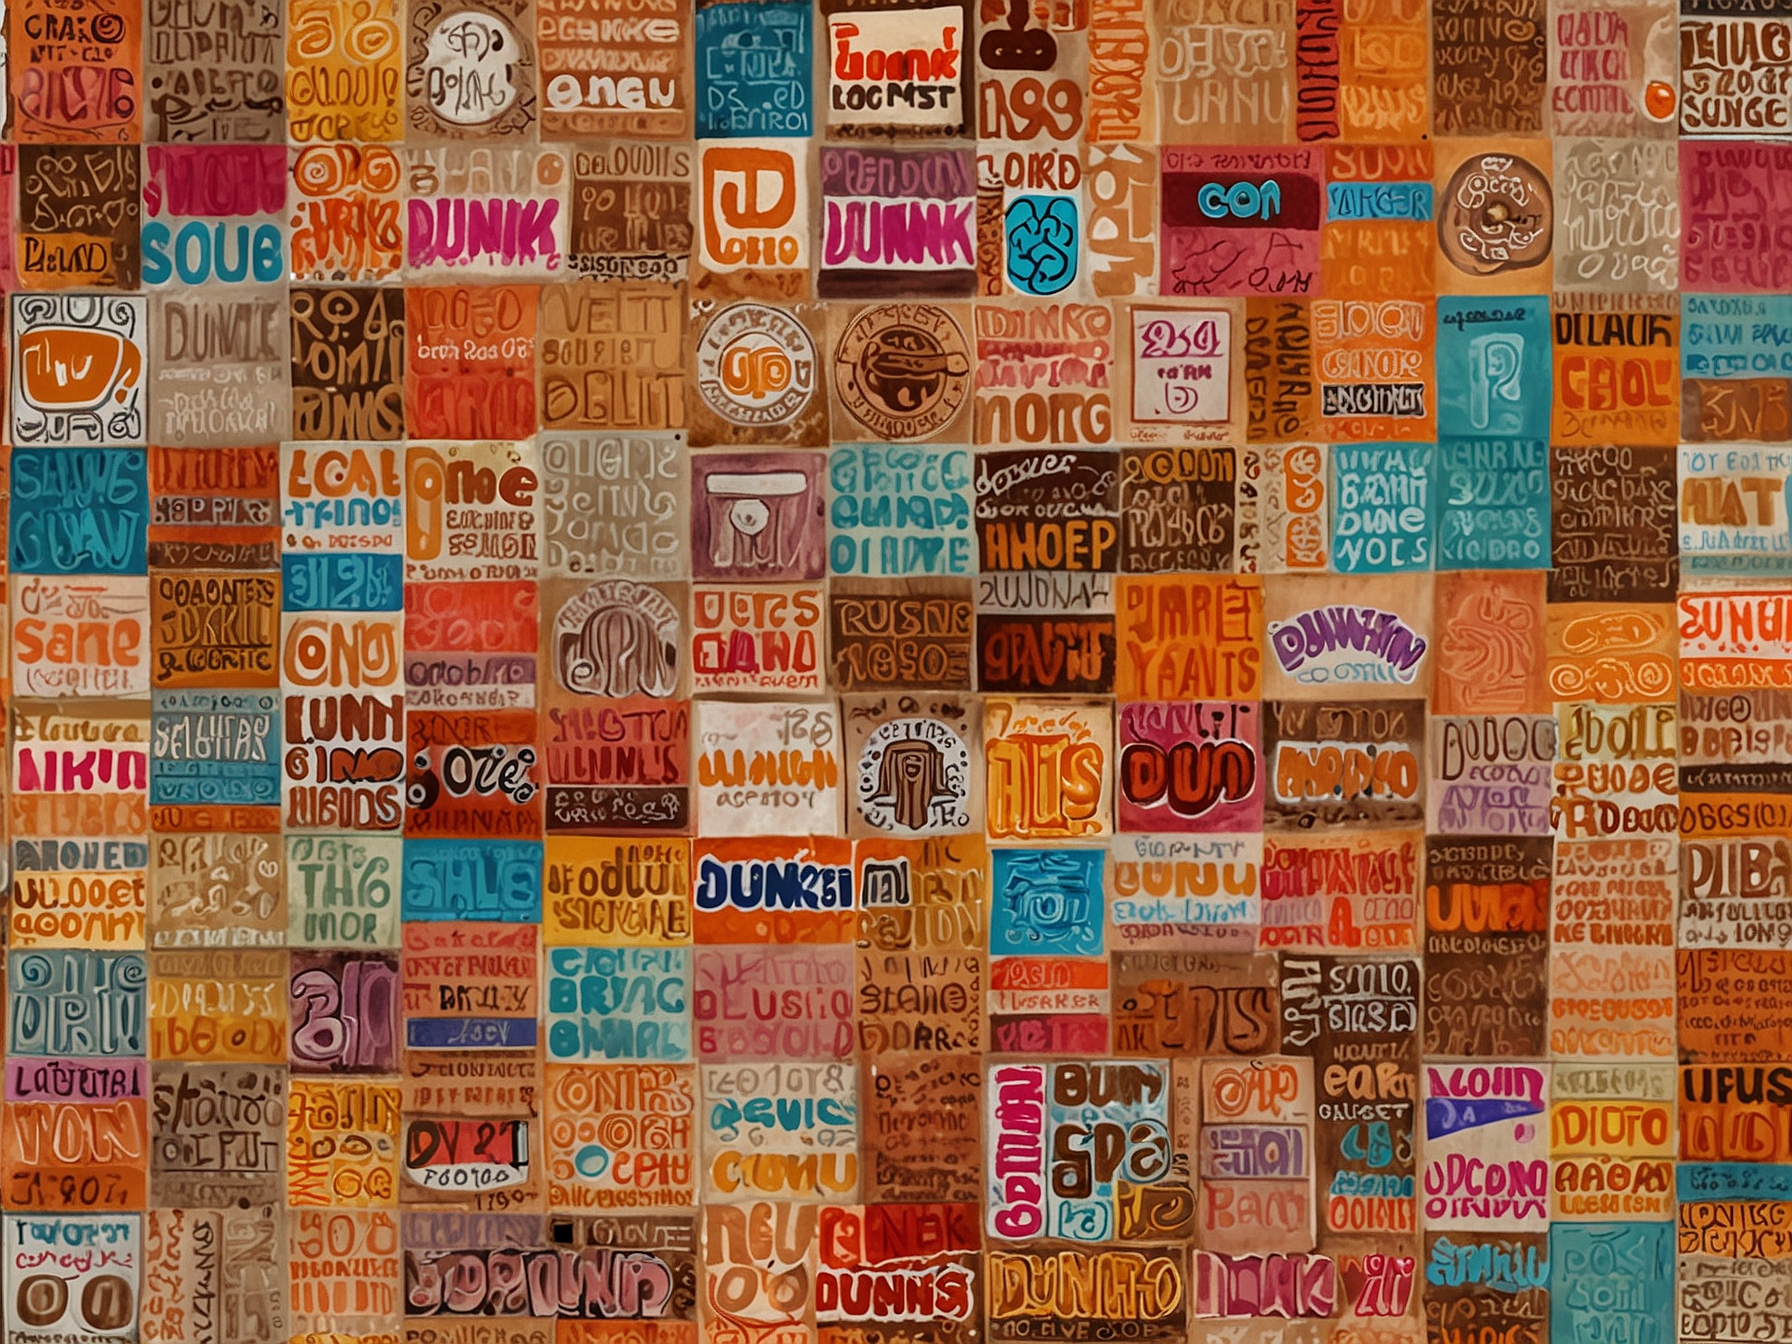 A collage of different Dunkin' logos over the years, highlighting variations in colors, fonts, and designs that fans have spotted, contributing to the ongoing conspiracy theories.